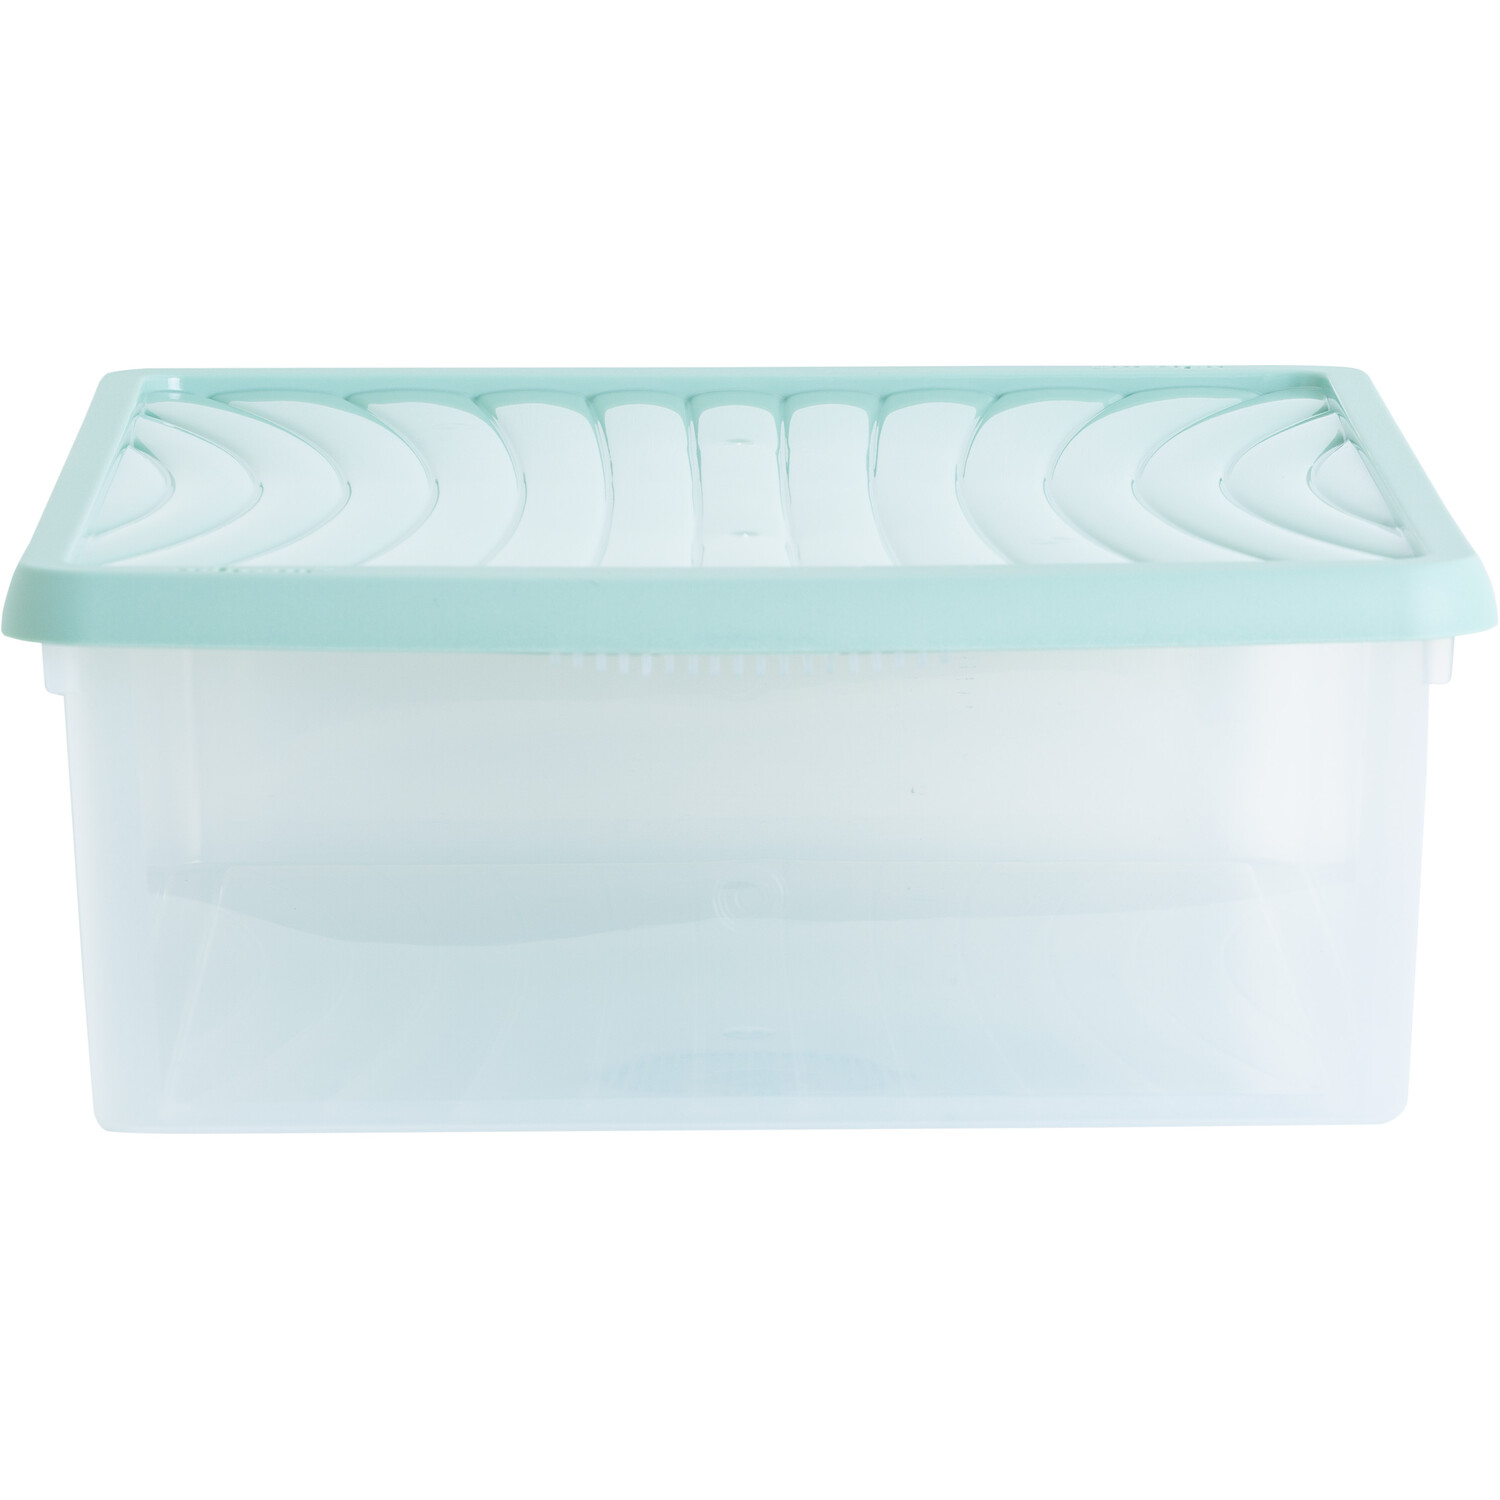 Single 23L Clear Stackable Storage Box with Lid in Assorted styles Image 2